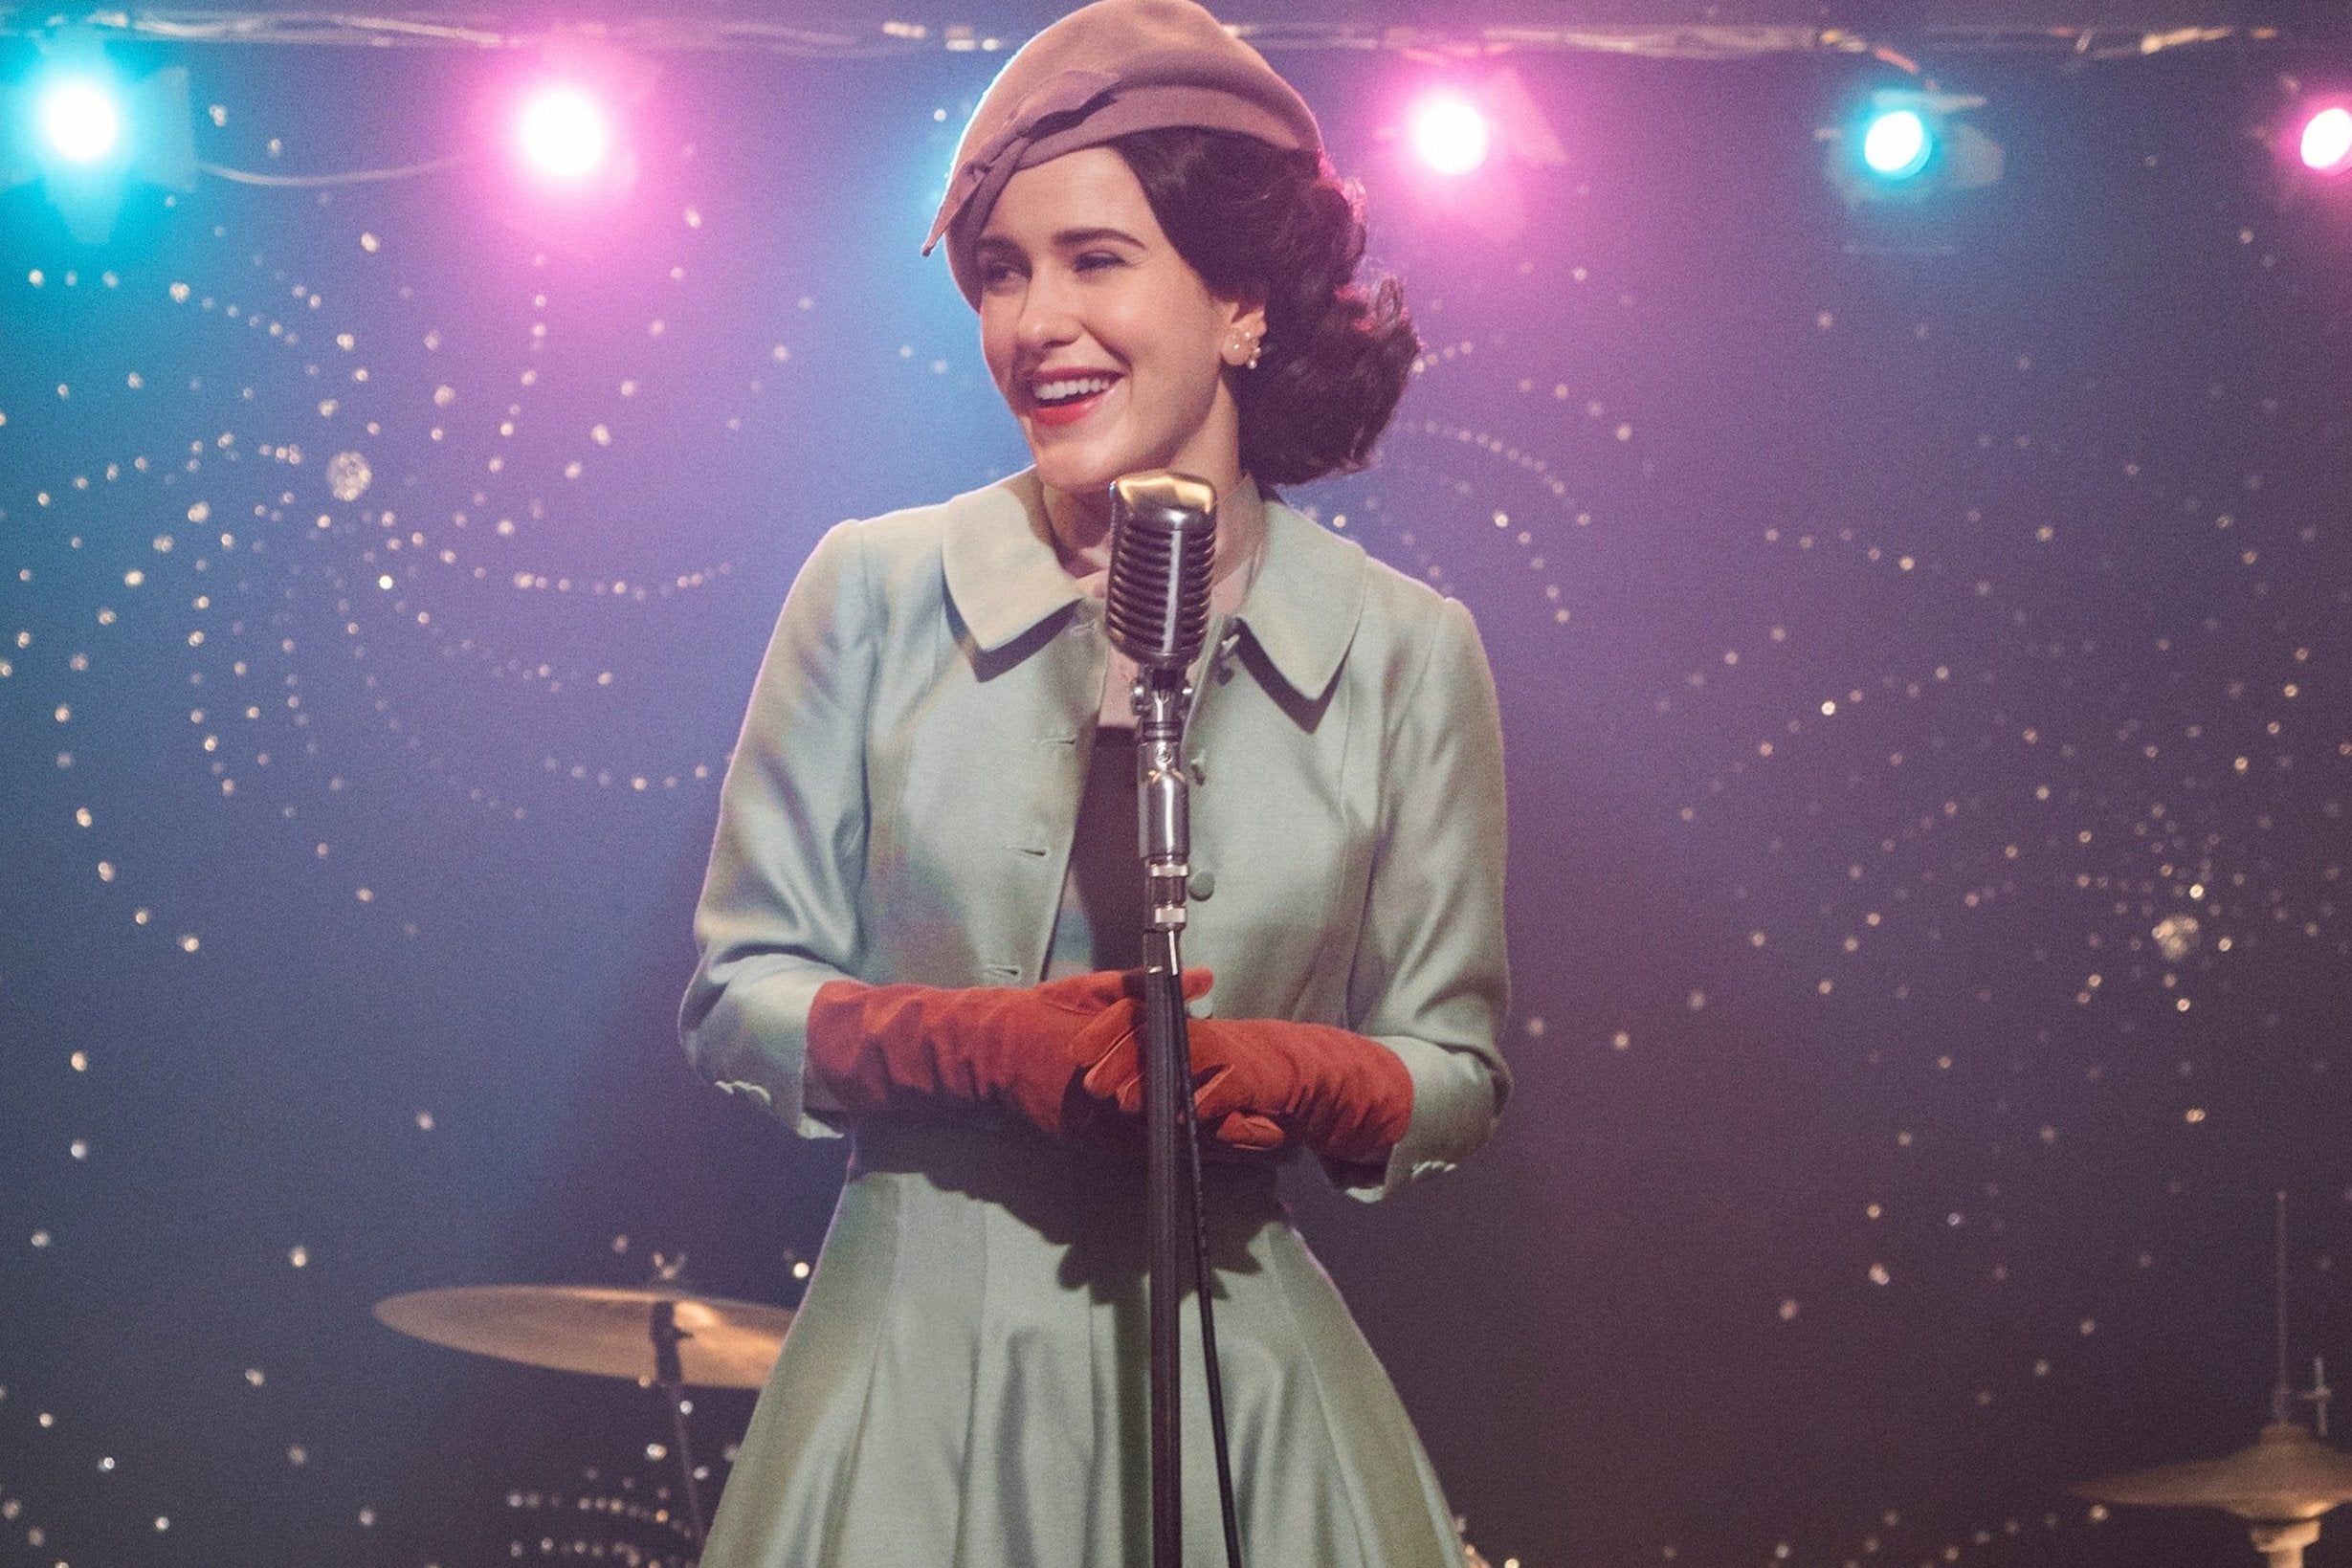 Best Performance by an Actress in a Television Series - Musical or Comedy: Rachel Brosnahan (The Marvelous Mrs. Maisel)